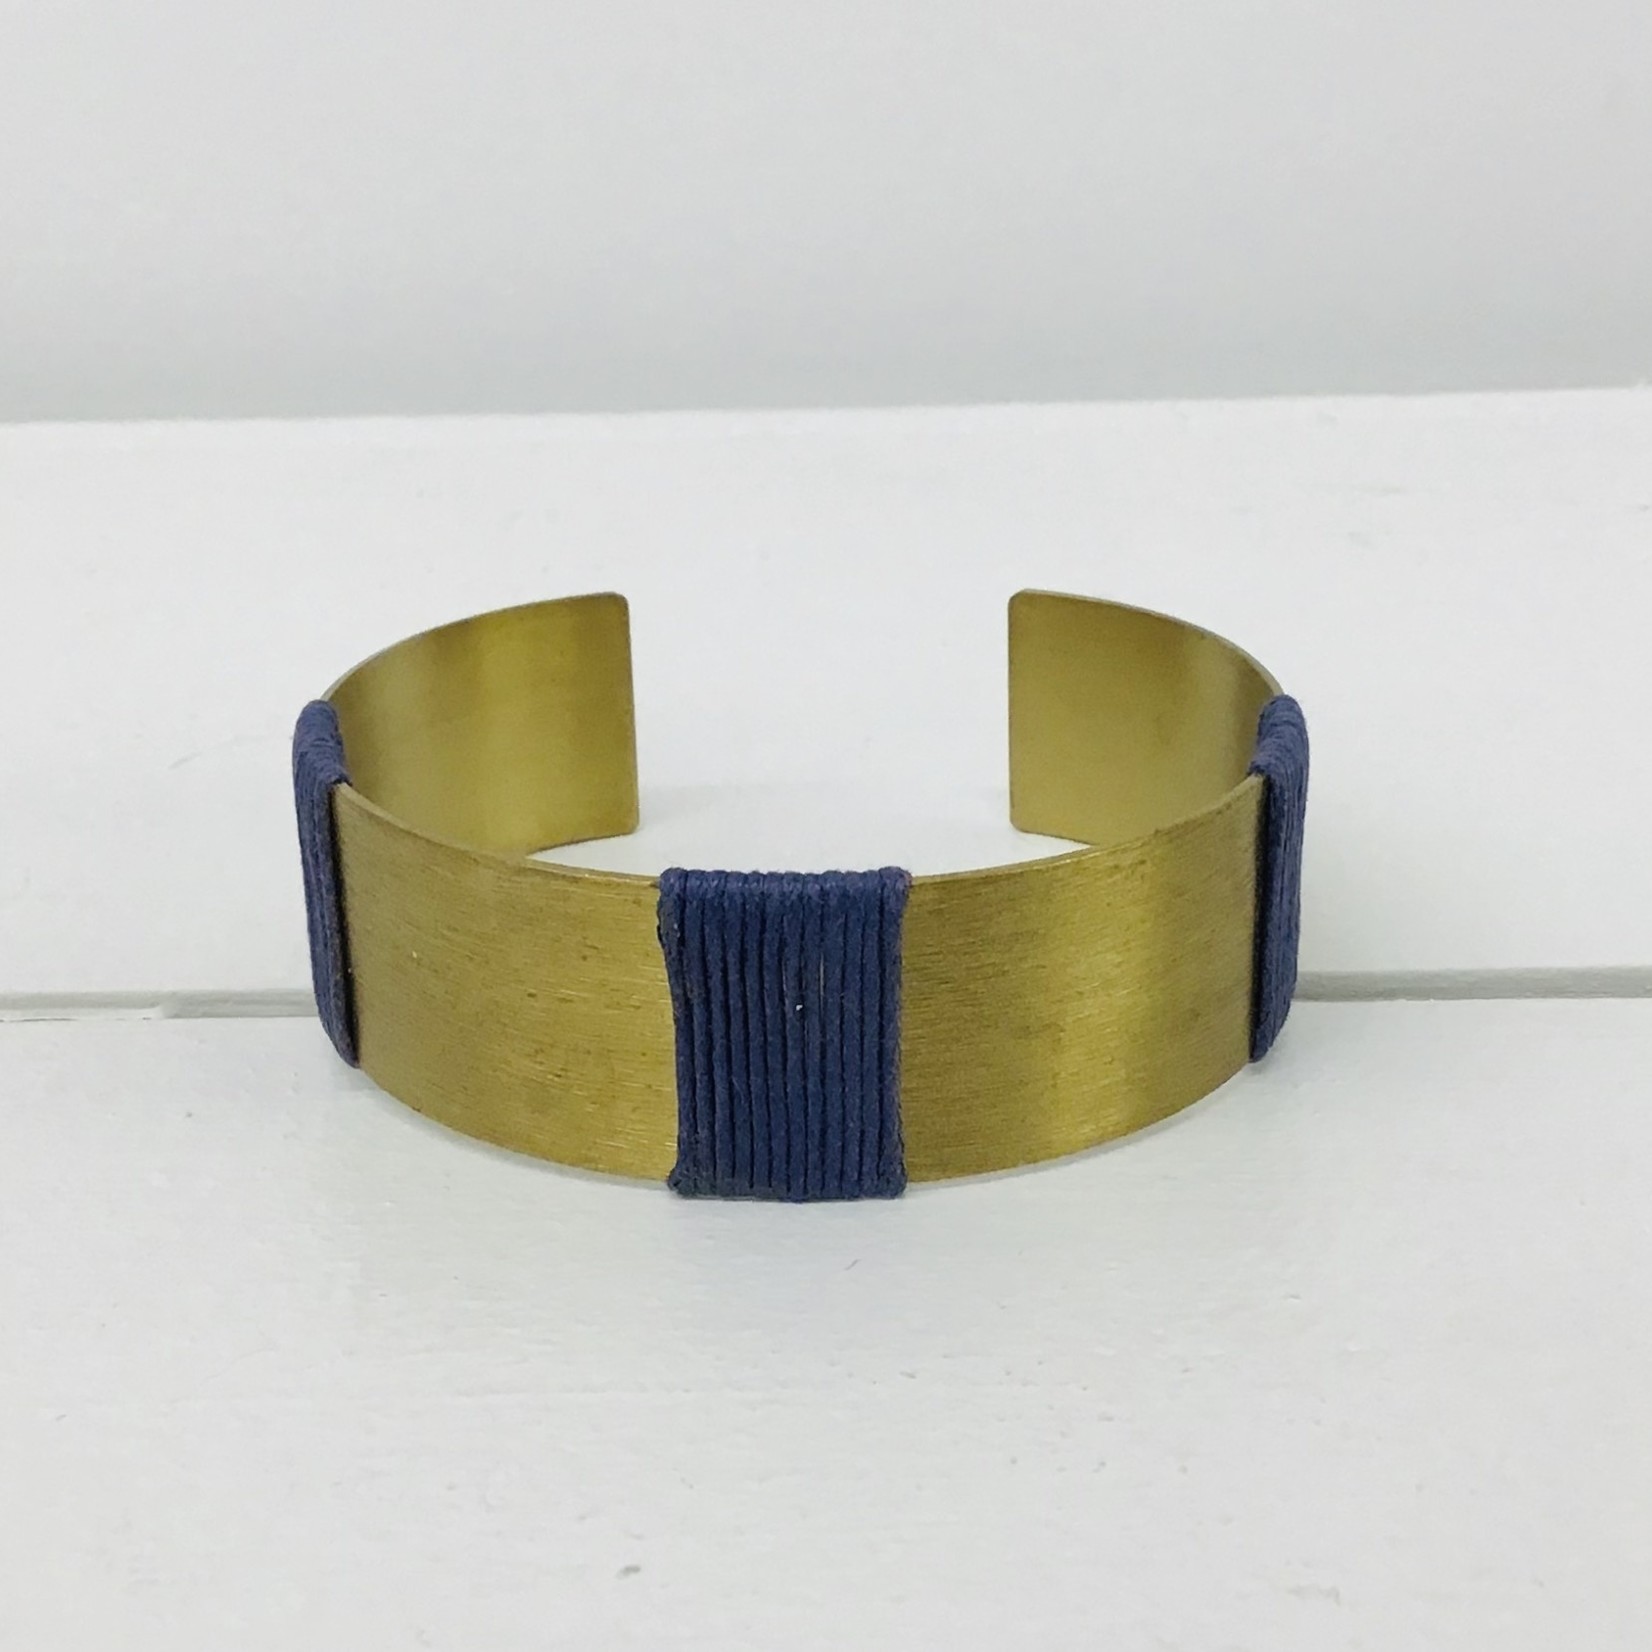 Global Crafts Kaia Cuff Navy and Gold, India